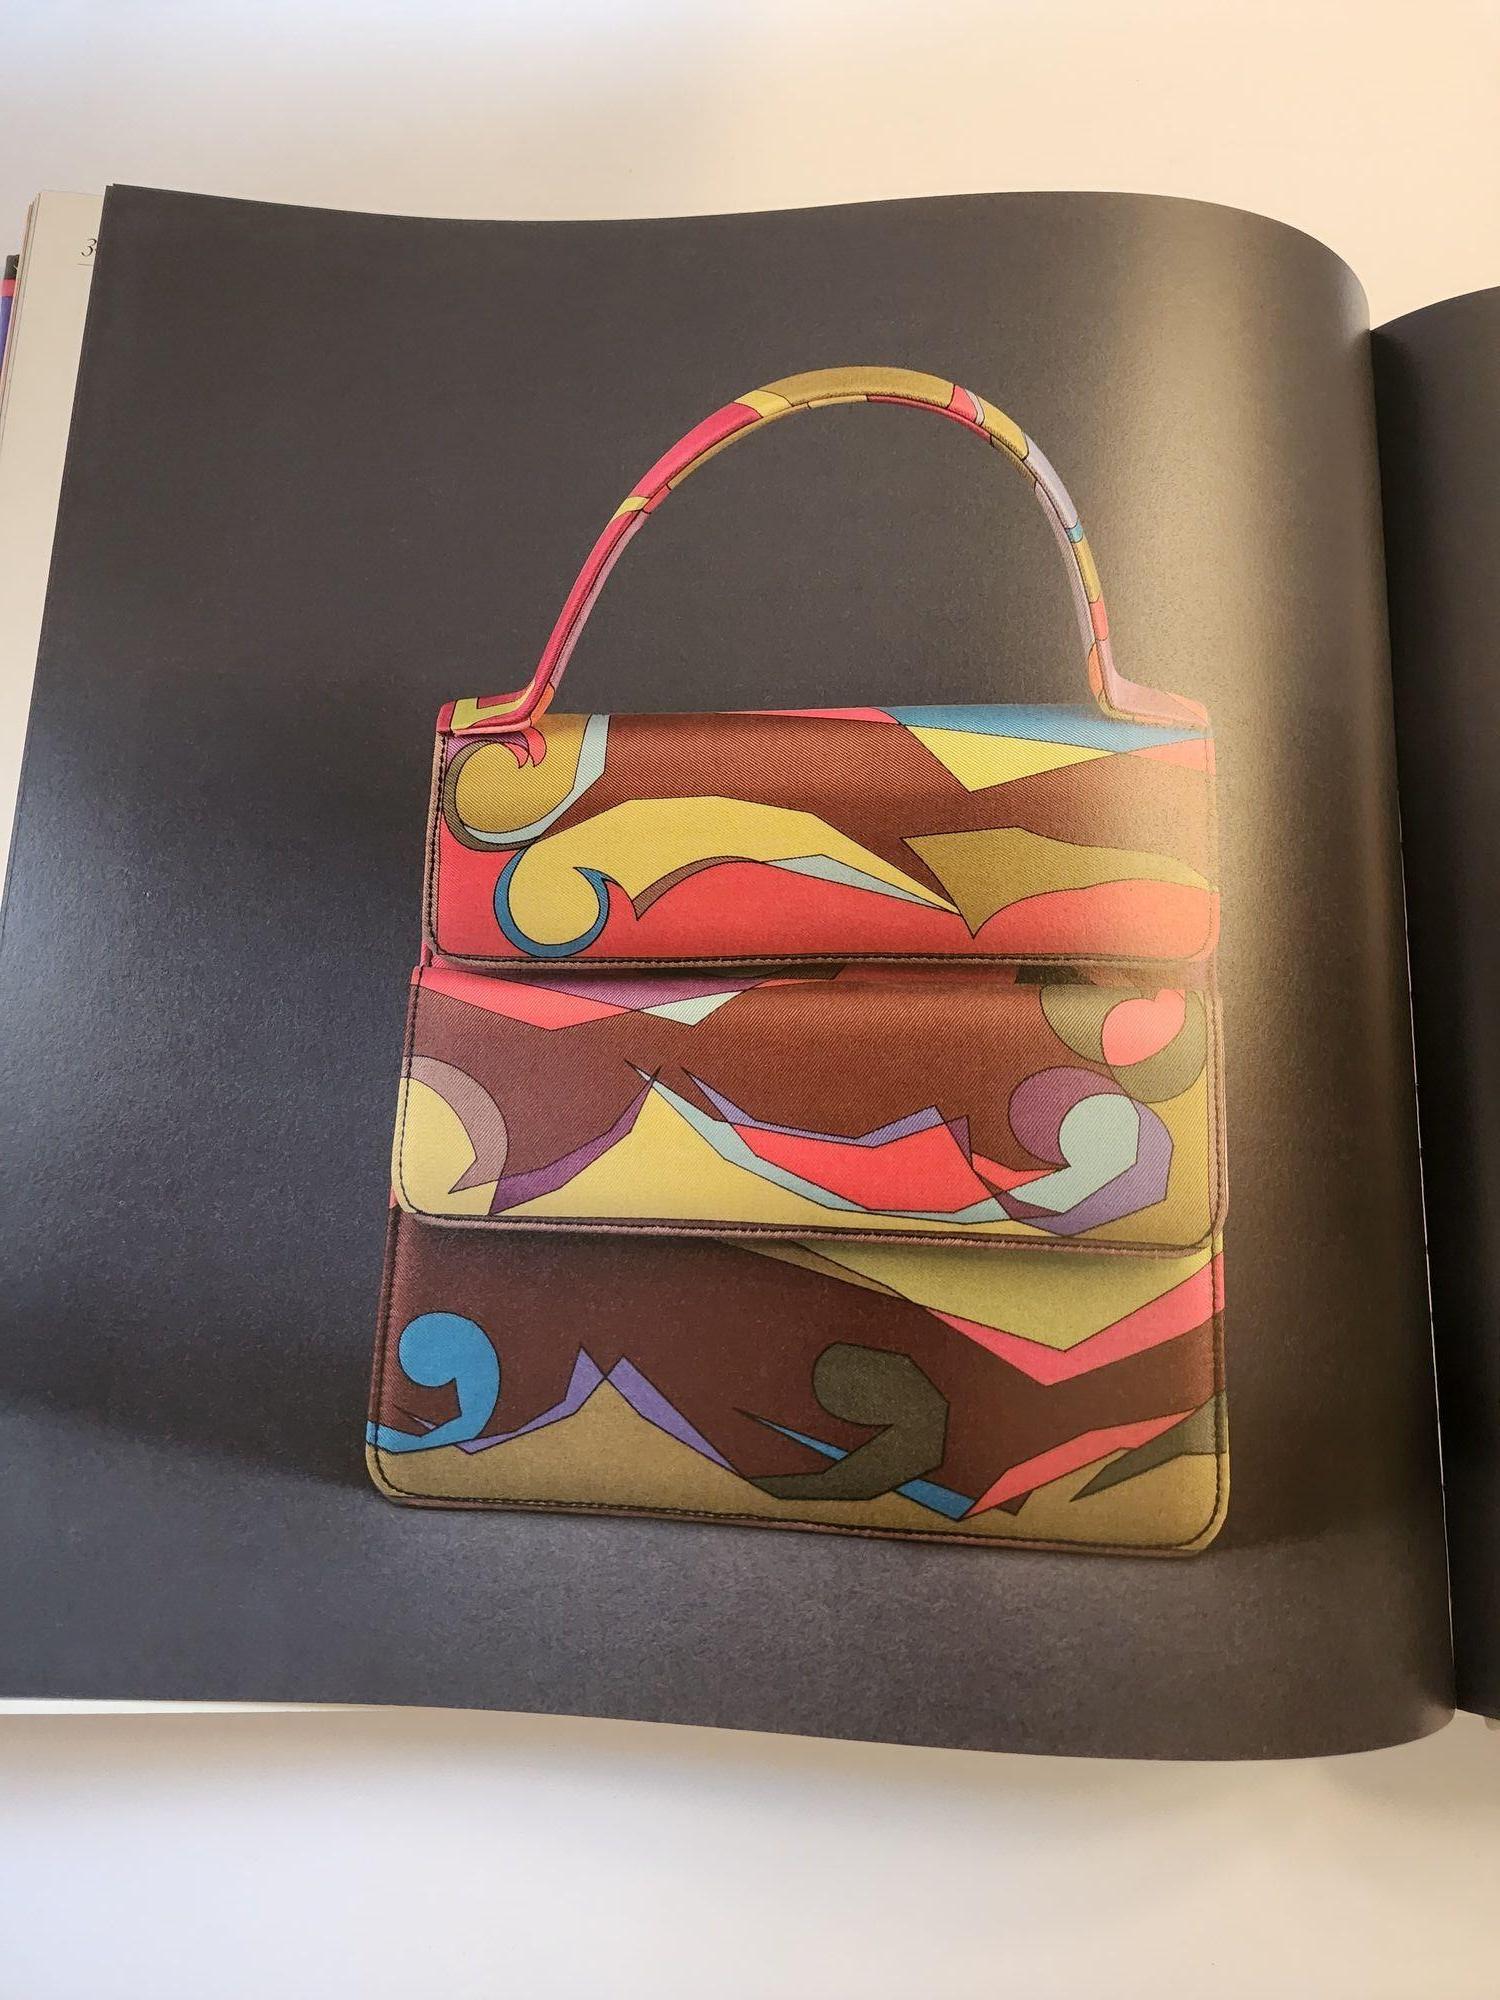 Emilio Pucci - Fashion Story -Limited Edition Taschen 2010 For Sale 2